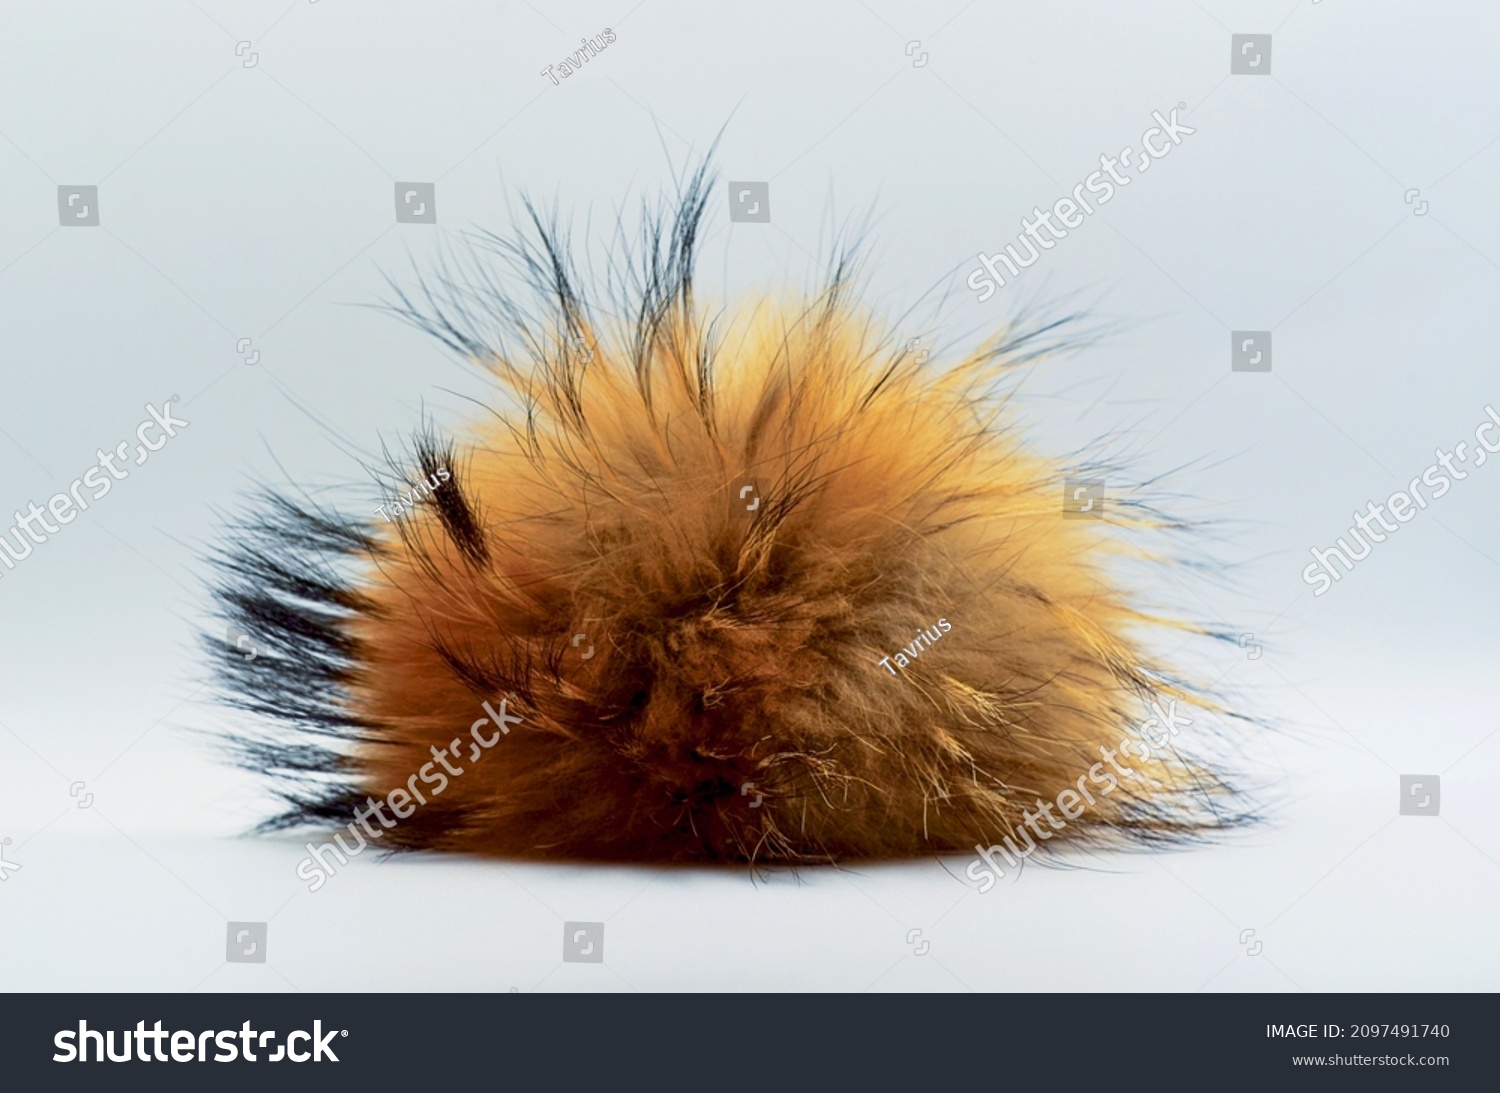 Fluffy lump, fluff in the center of the frame, fur toy, fluffy red fur, place for text, unusual background, piece of fur, fox fur  #2097491740